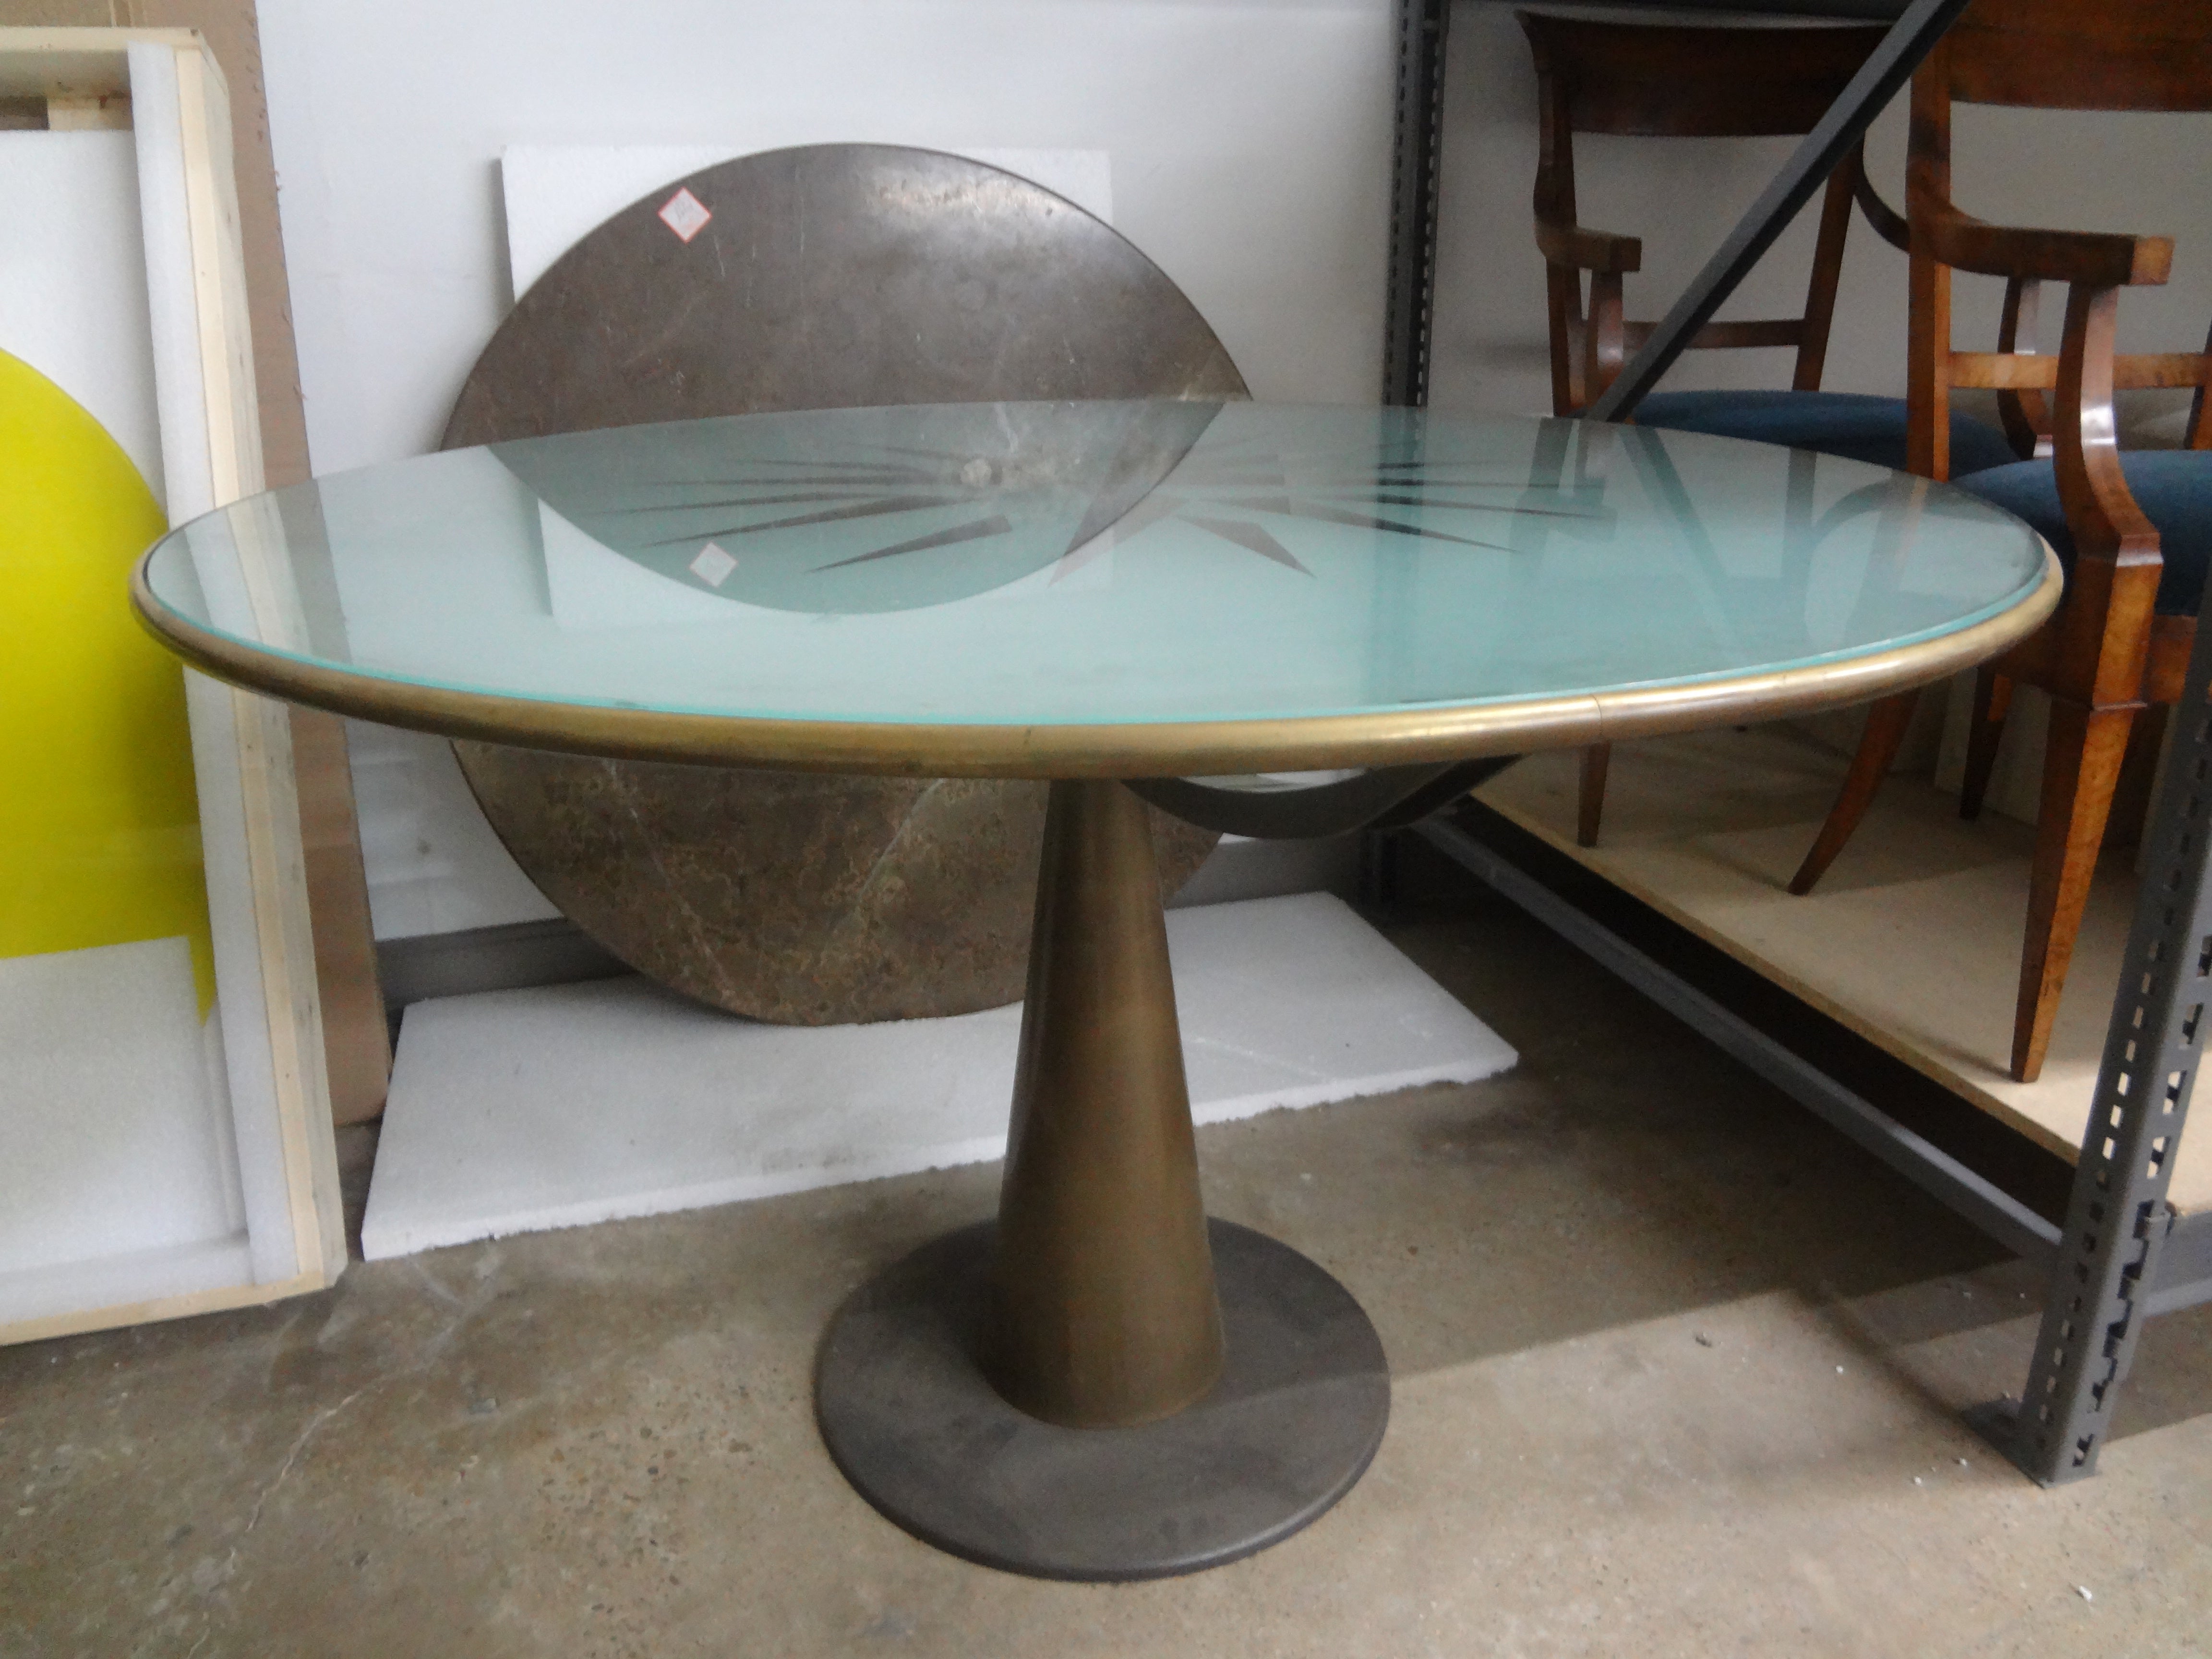 Italian Modern Oscar Tusquets Astrolabio Center Table.
This iconic Italian modern Oscar Tusquets Astrolabio for Aleph-Driade Center Table or dining table.
This table was designed by Catalan designer Oscar Tusquets for Aleph. The base is made out of